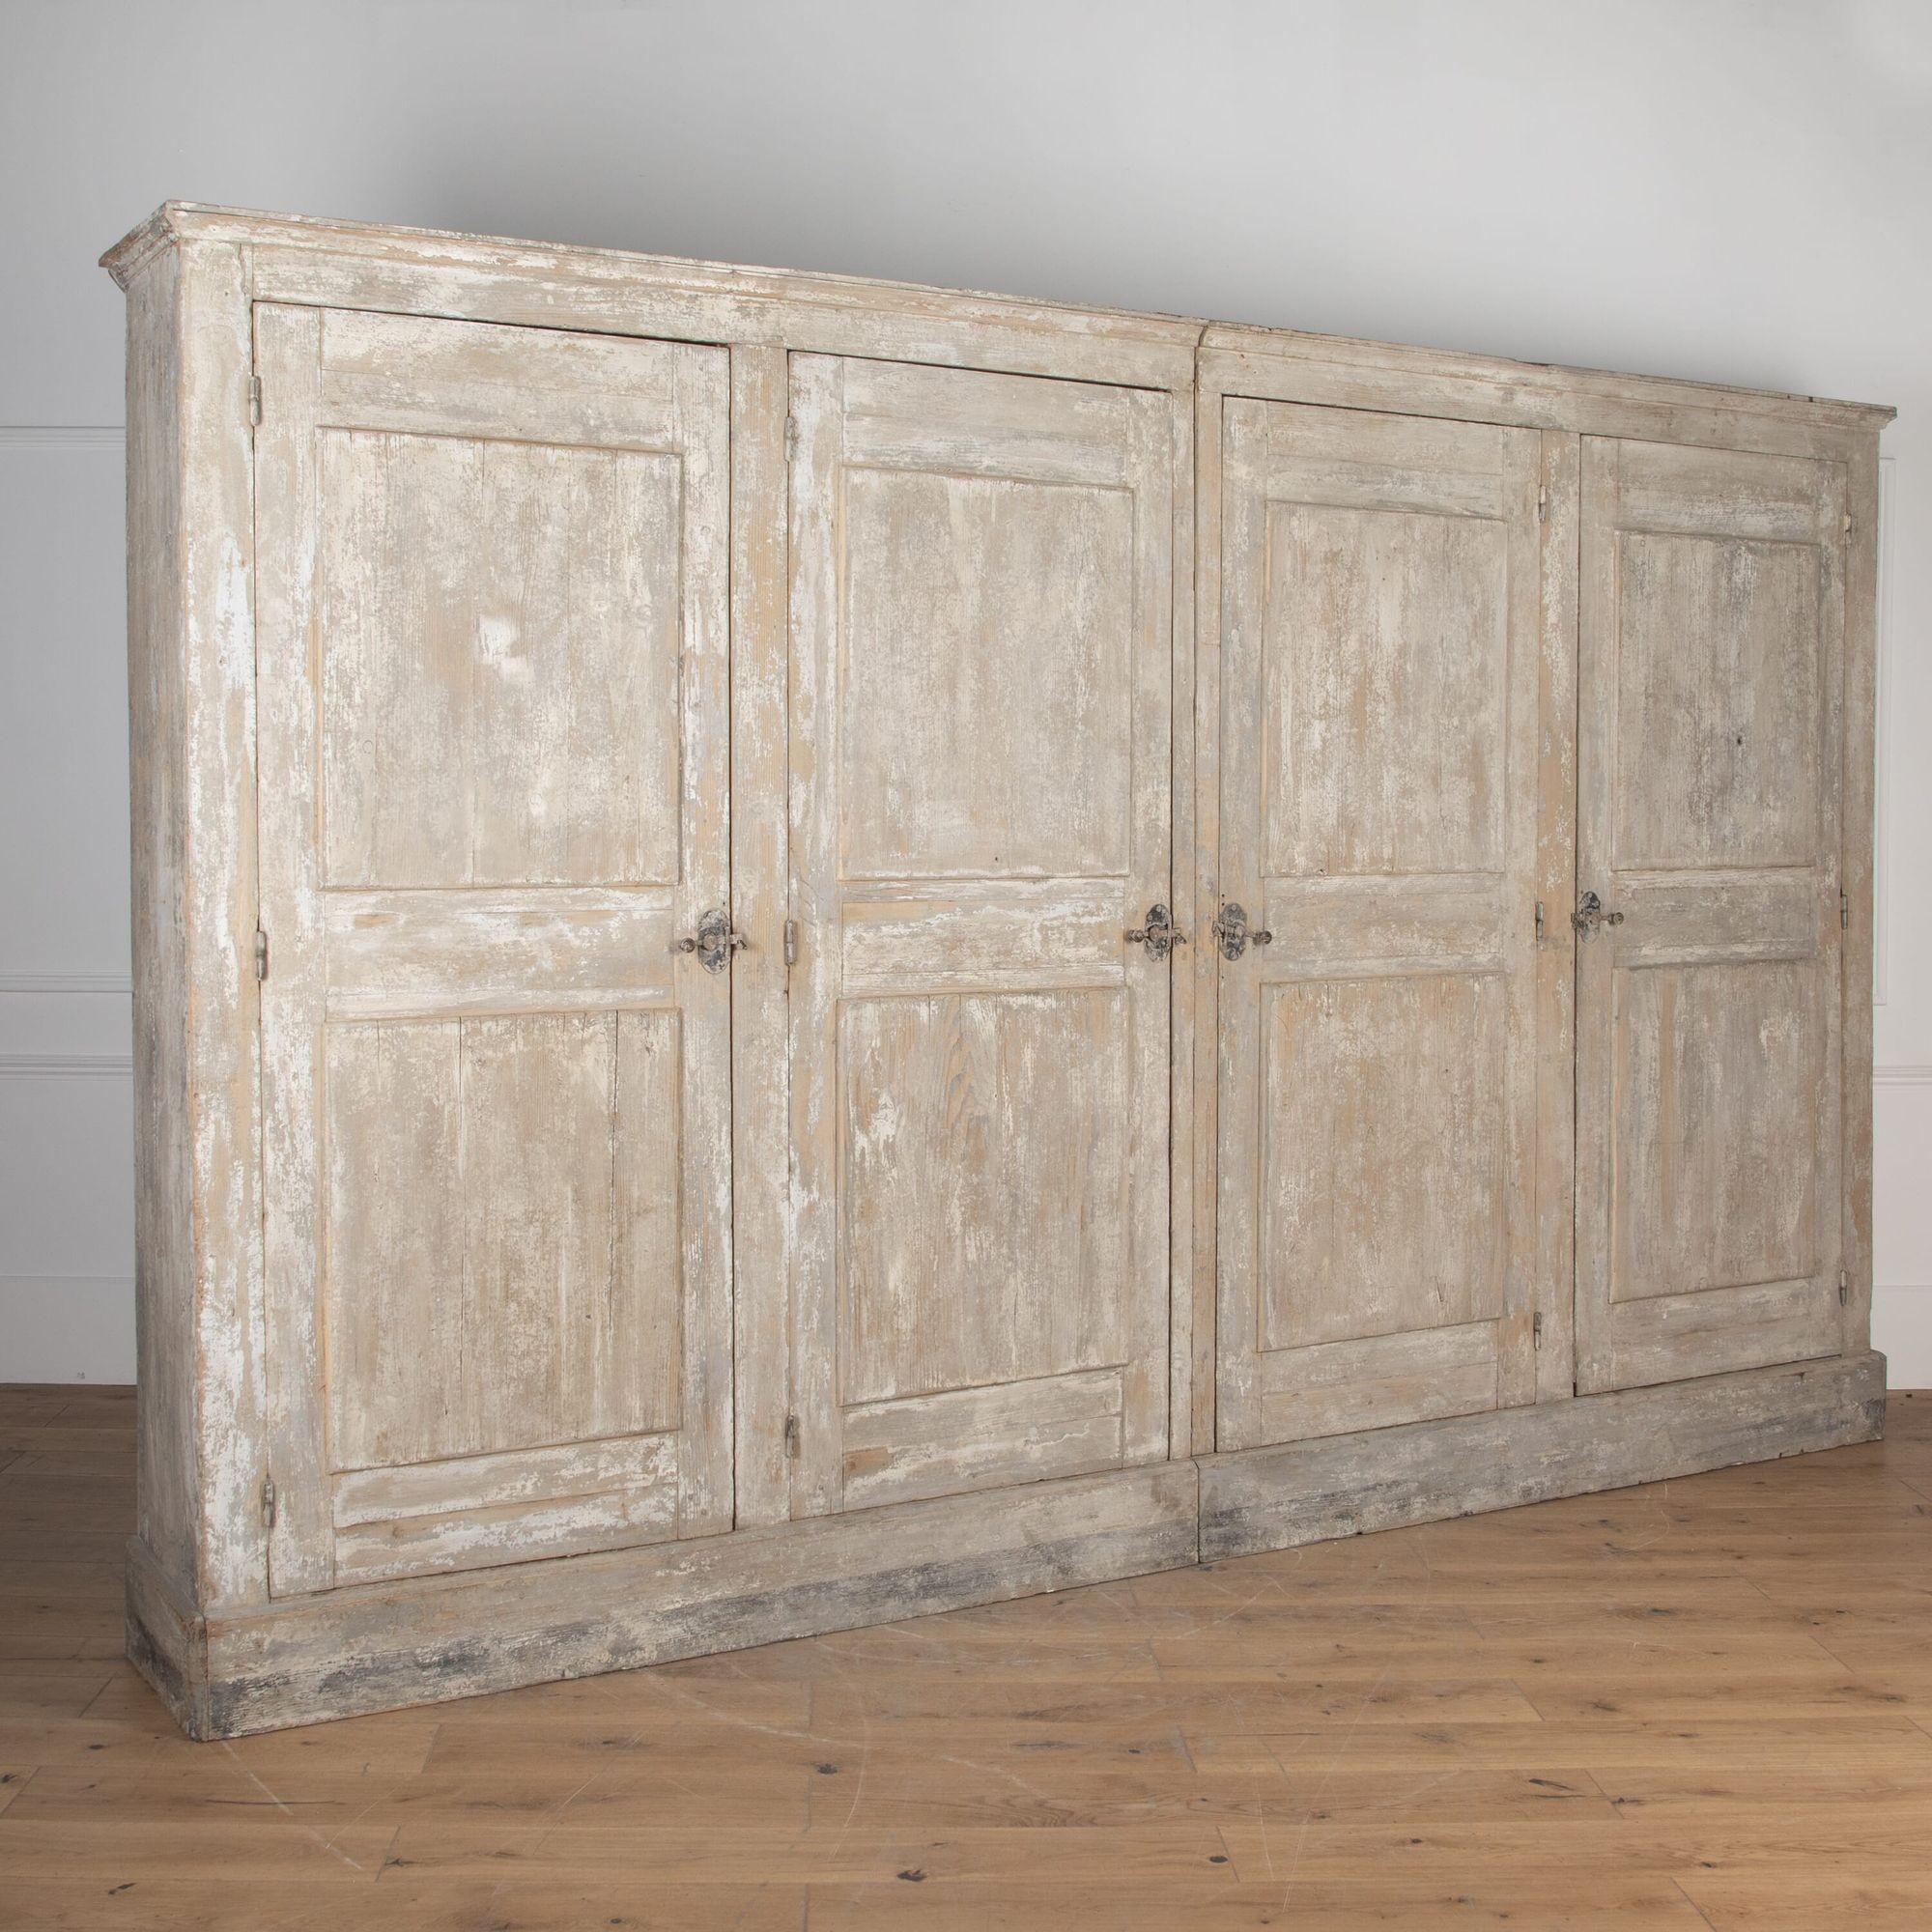 Monumental 20th century painted four door cupboard. 
This armoire has wonderful elegant proportions. It offers four large panelled doors with spacious shelves to the interior. 
This piece is painted grey and retains all of its original decorative